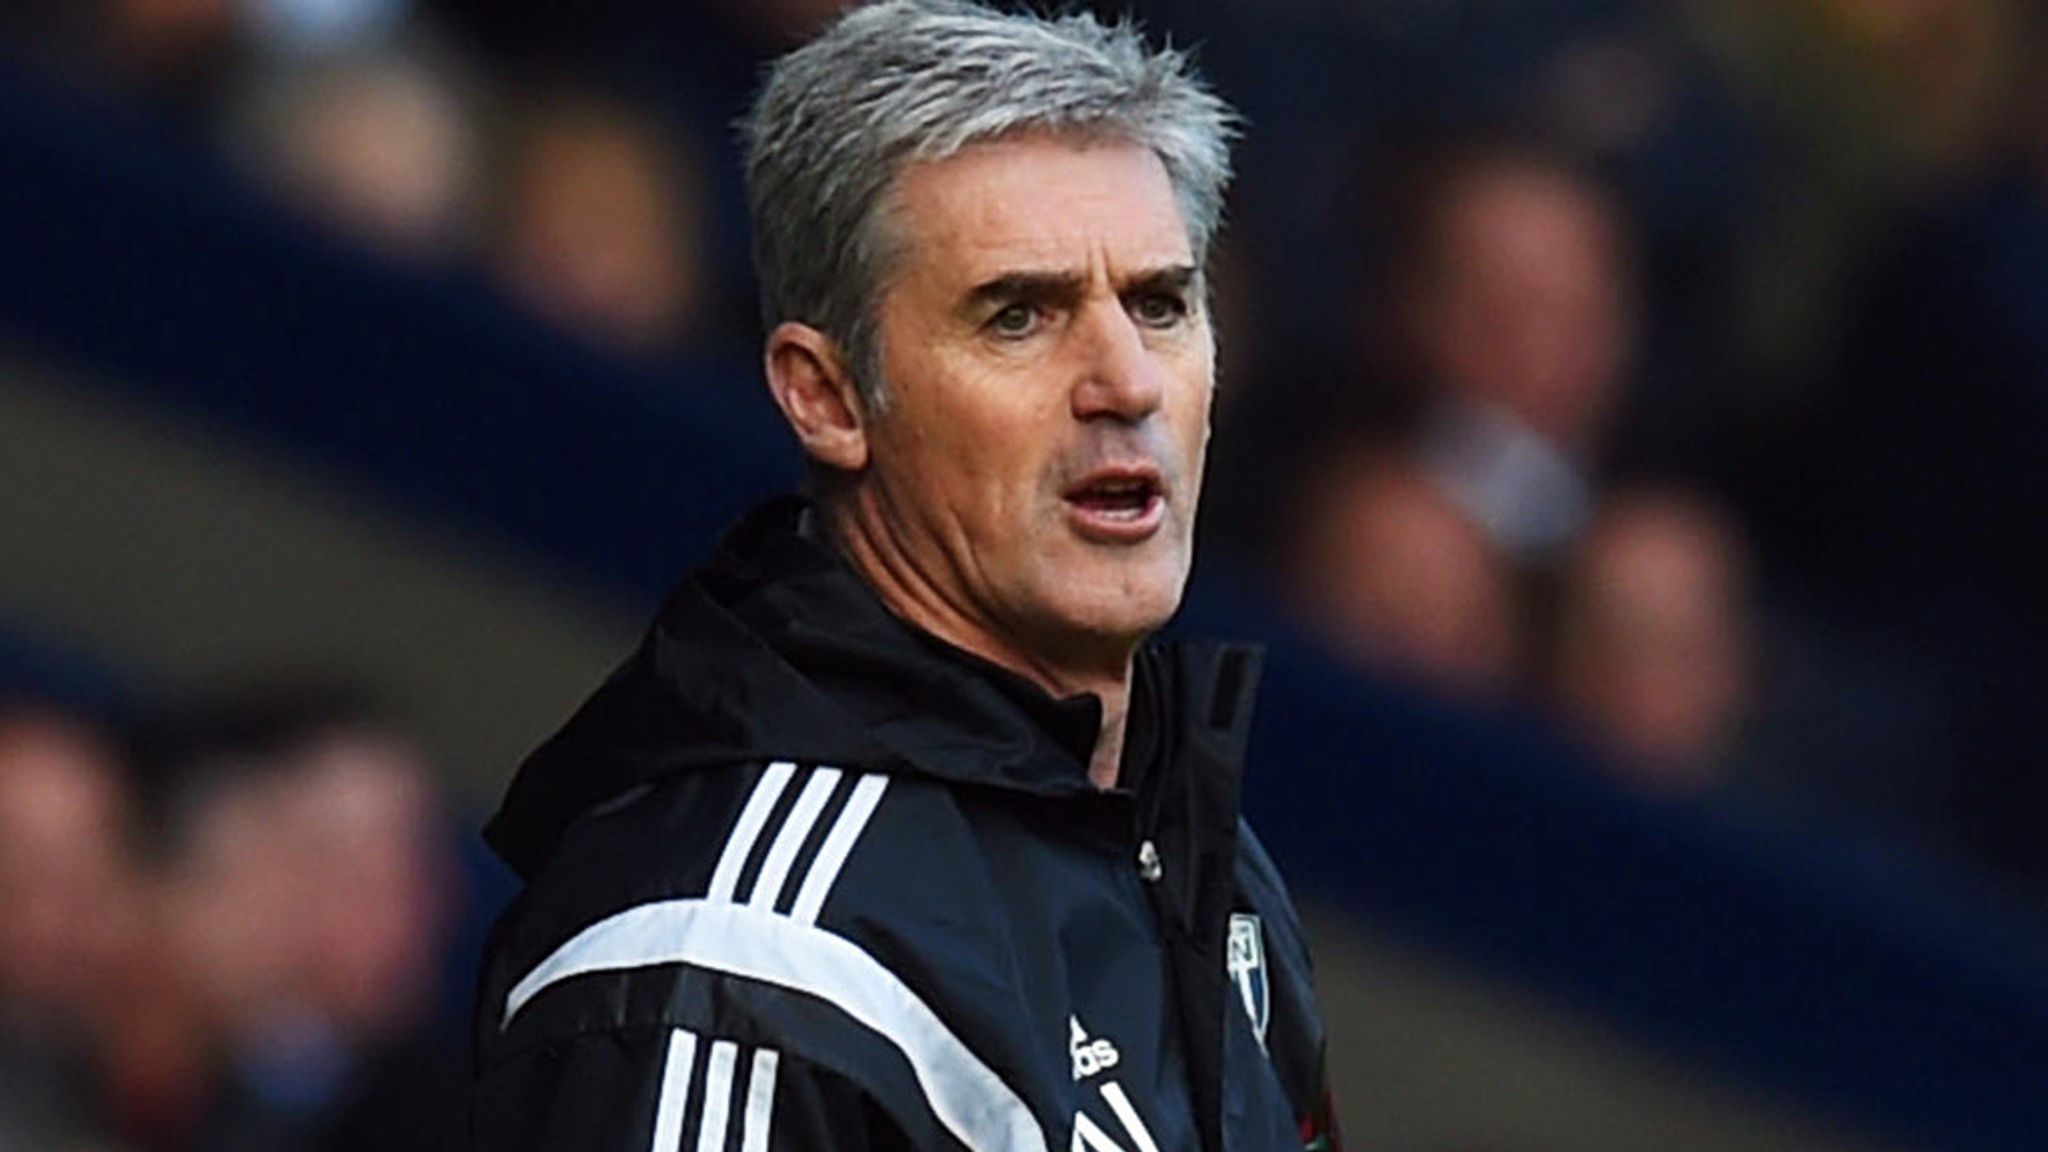 Alan Irvine admits he is 'still sore' about West Brom sacking ...